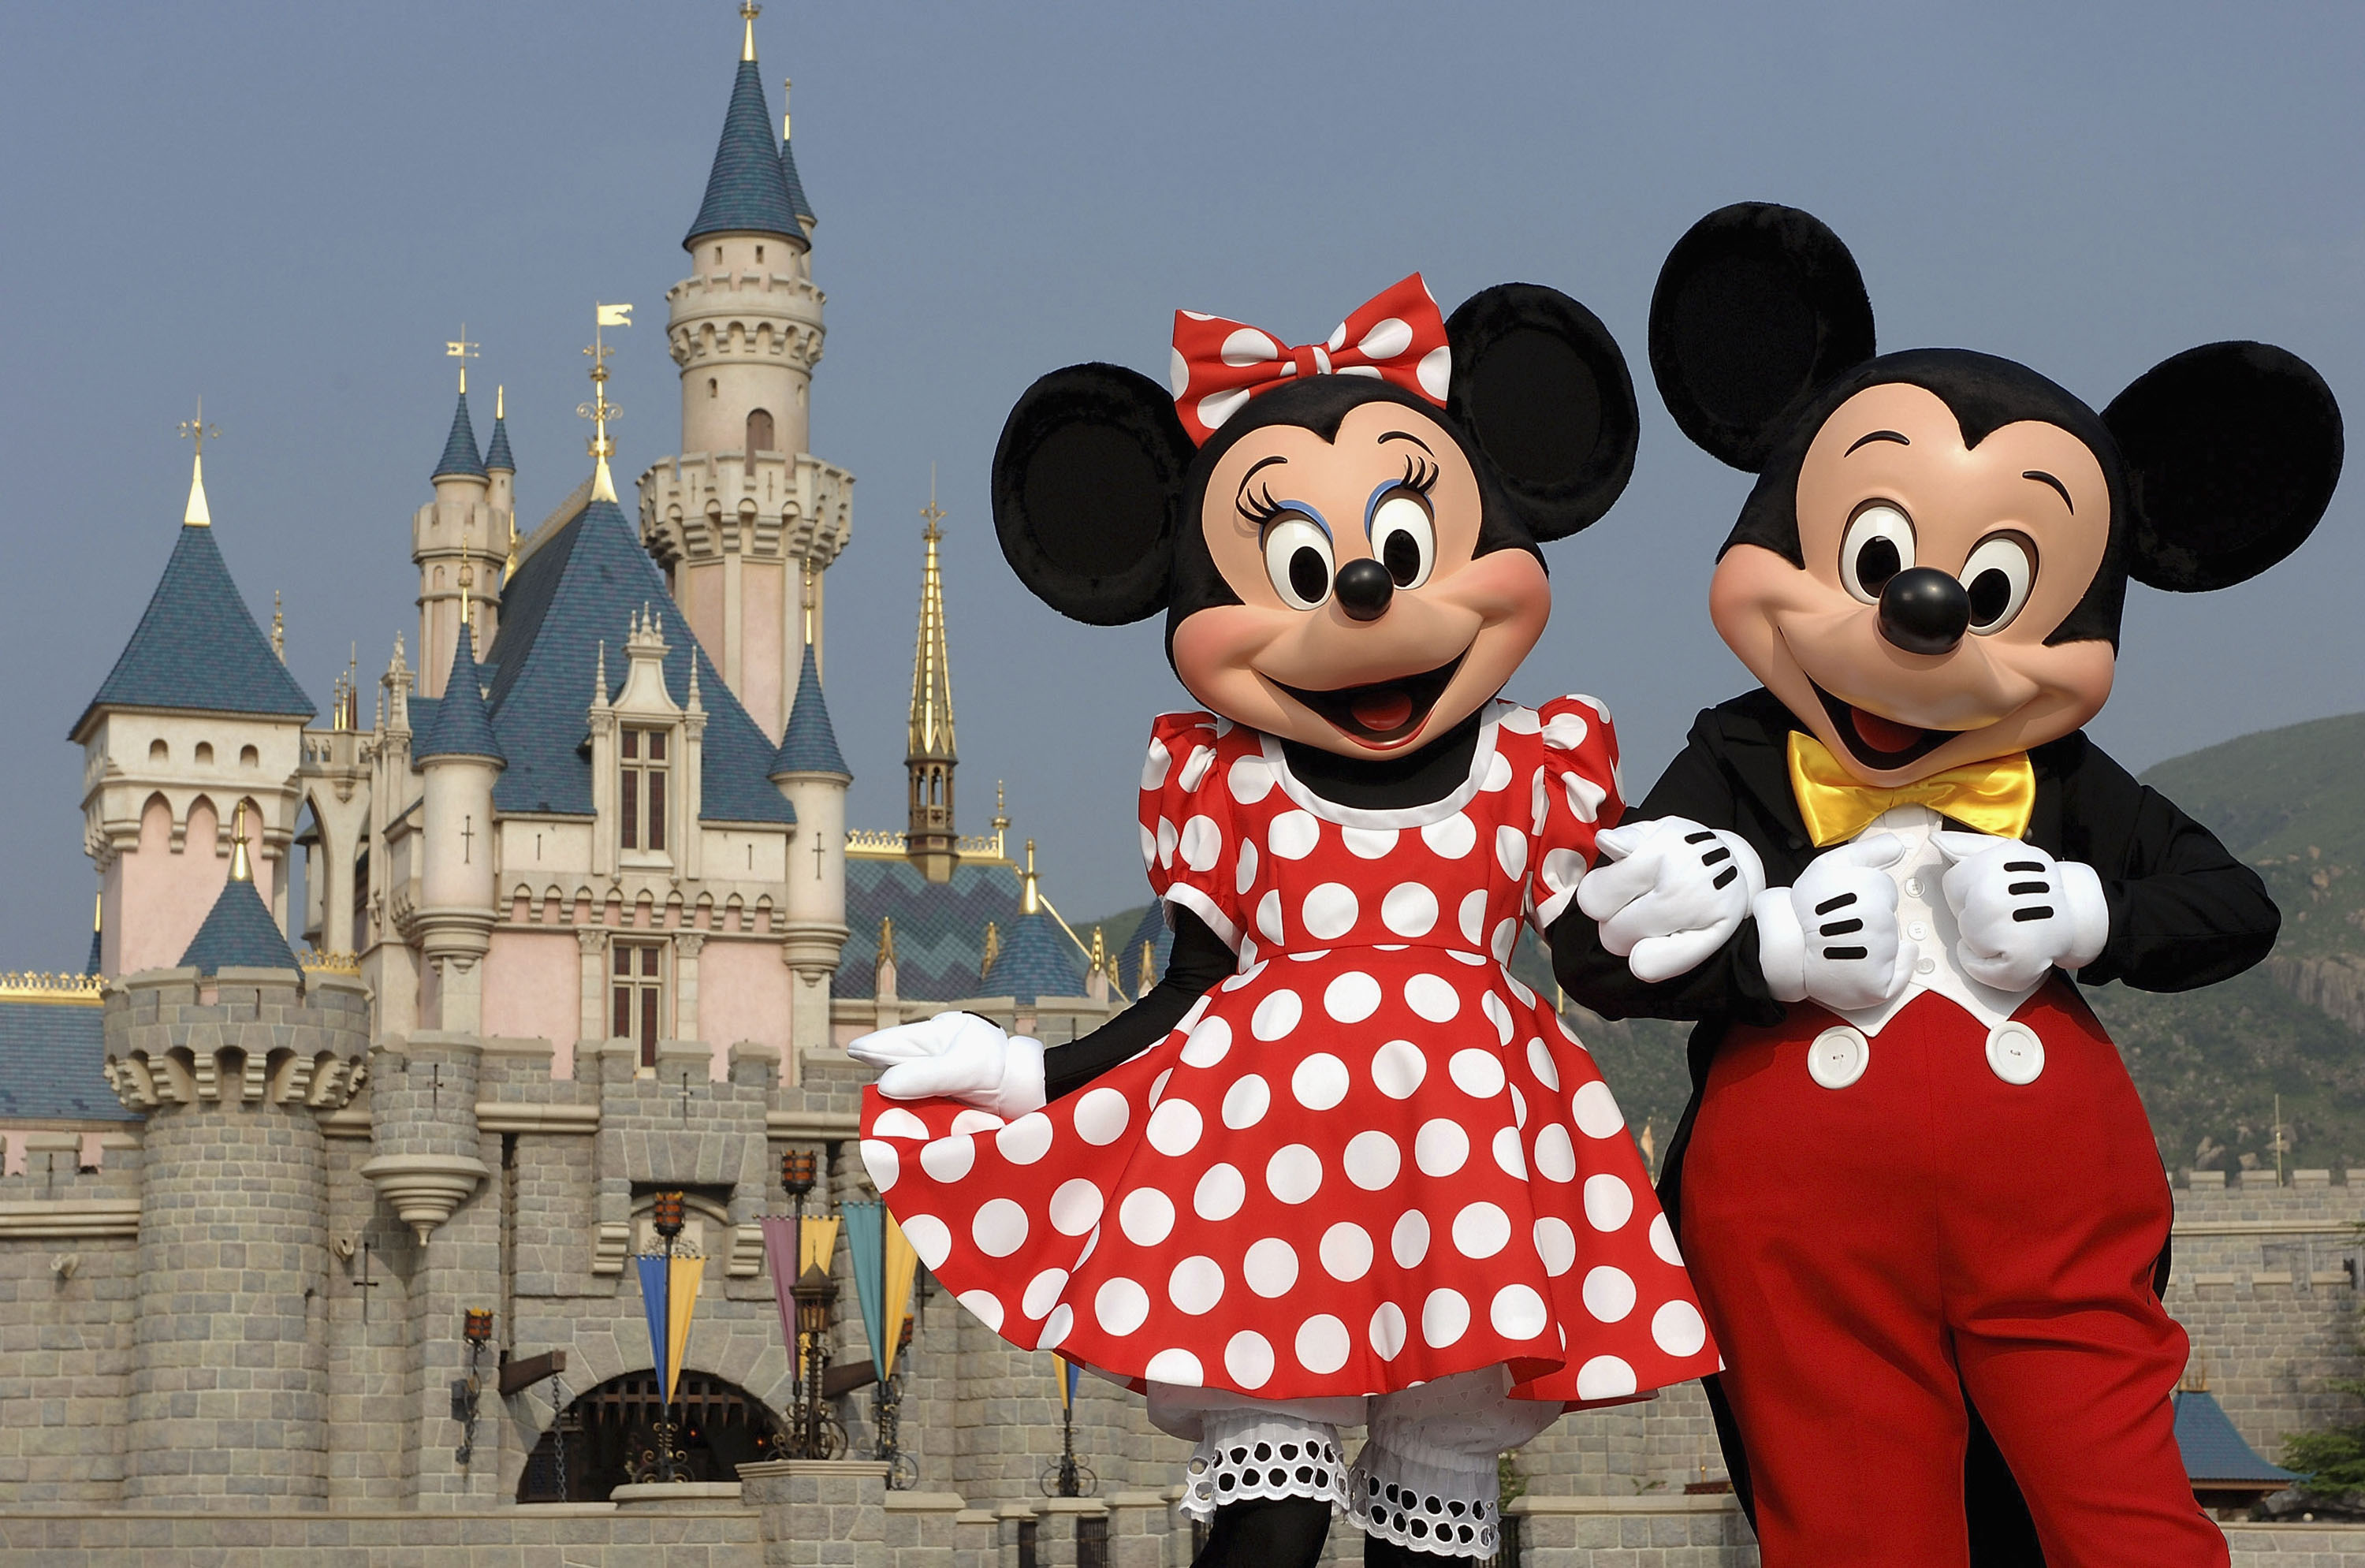 Mickey and Minnie Mouse near a castle